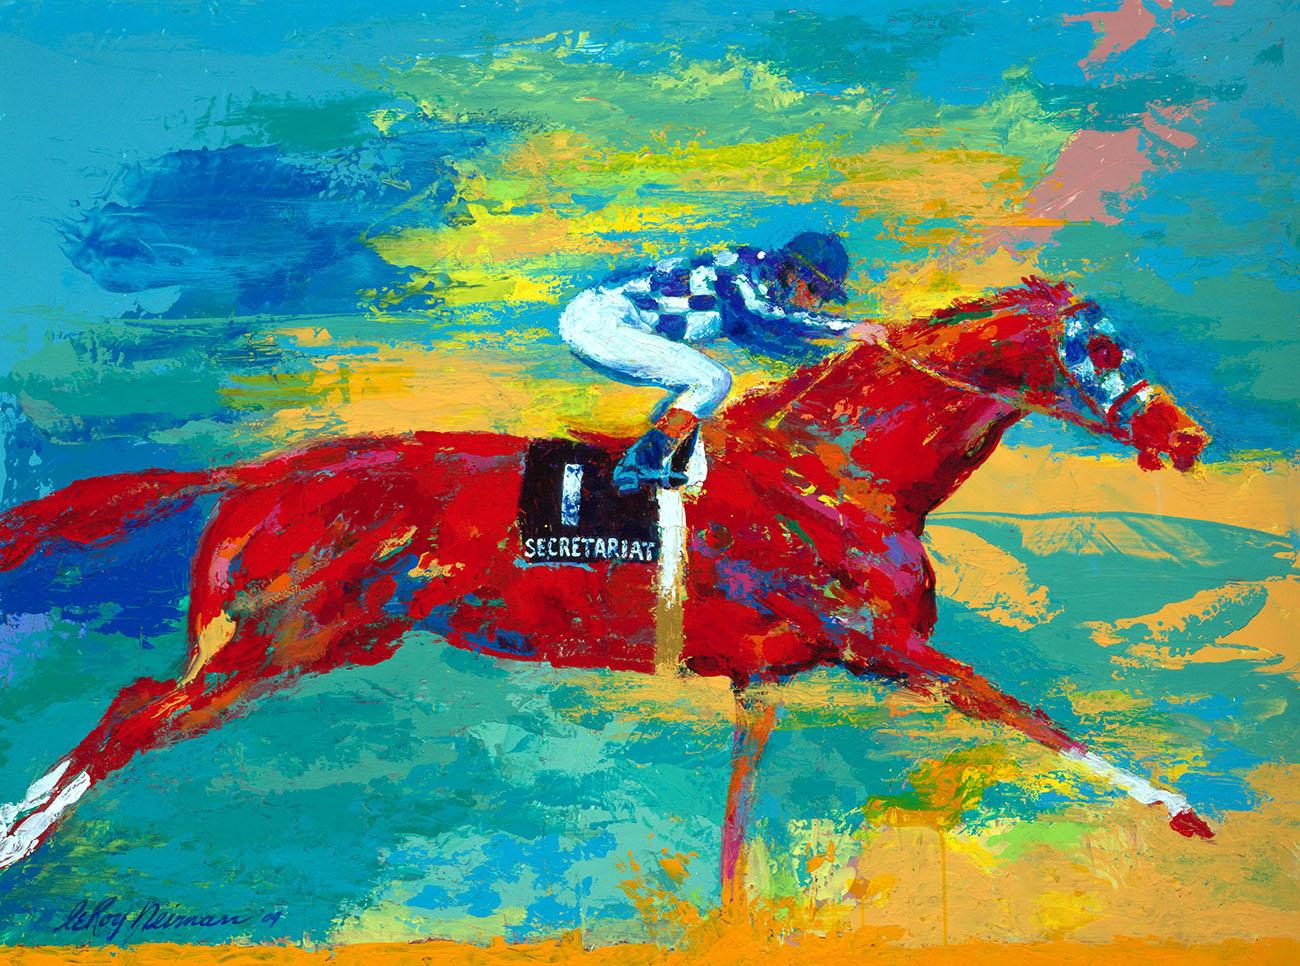 LeRoy Neiman, "The Great Secretariat", 27x34 Signed Limited Edition Serigraph 